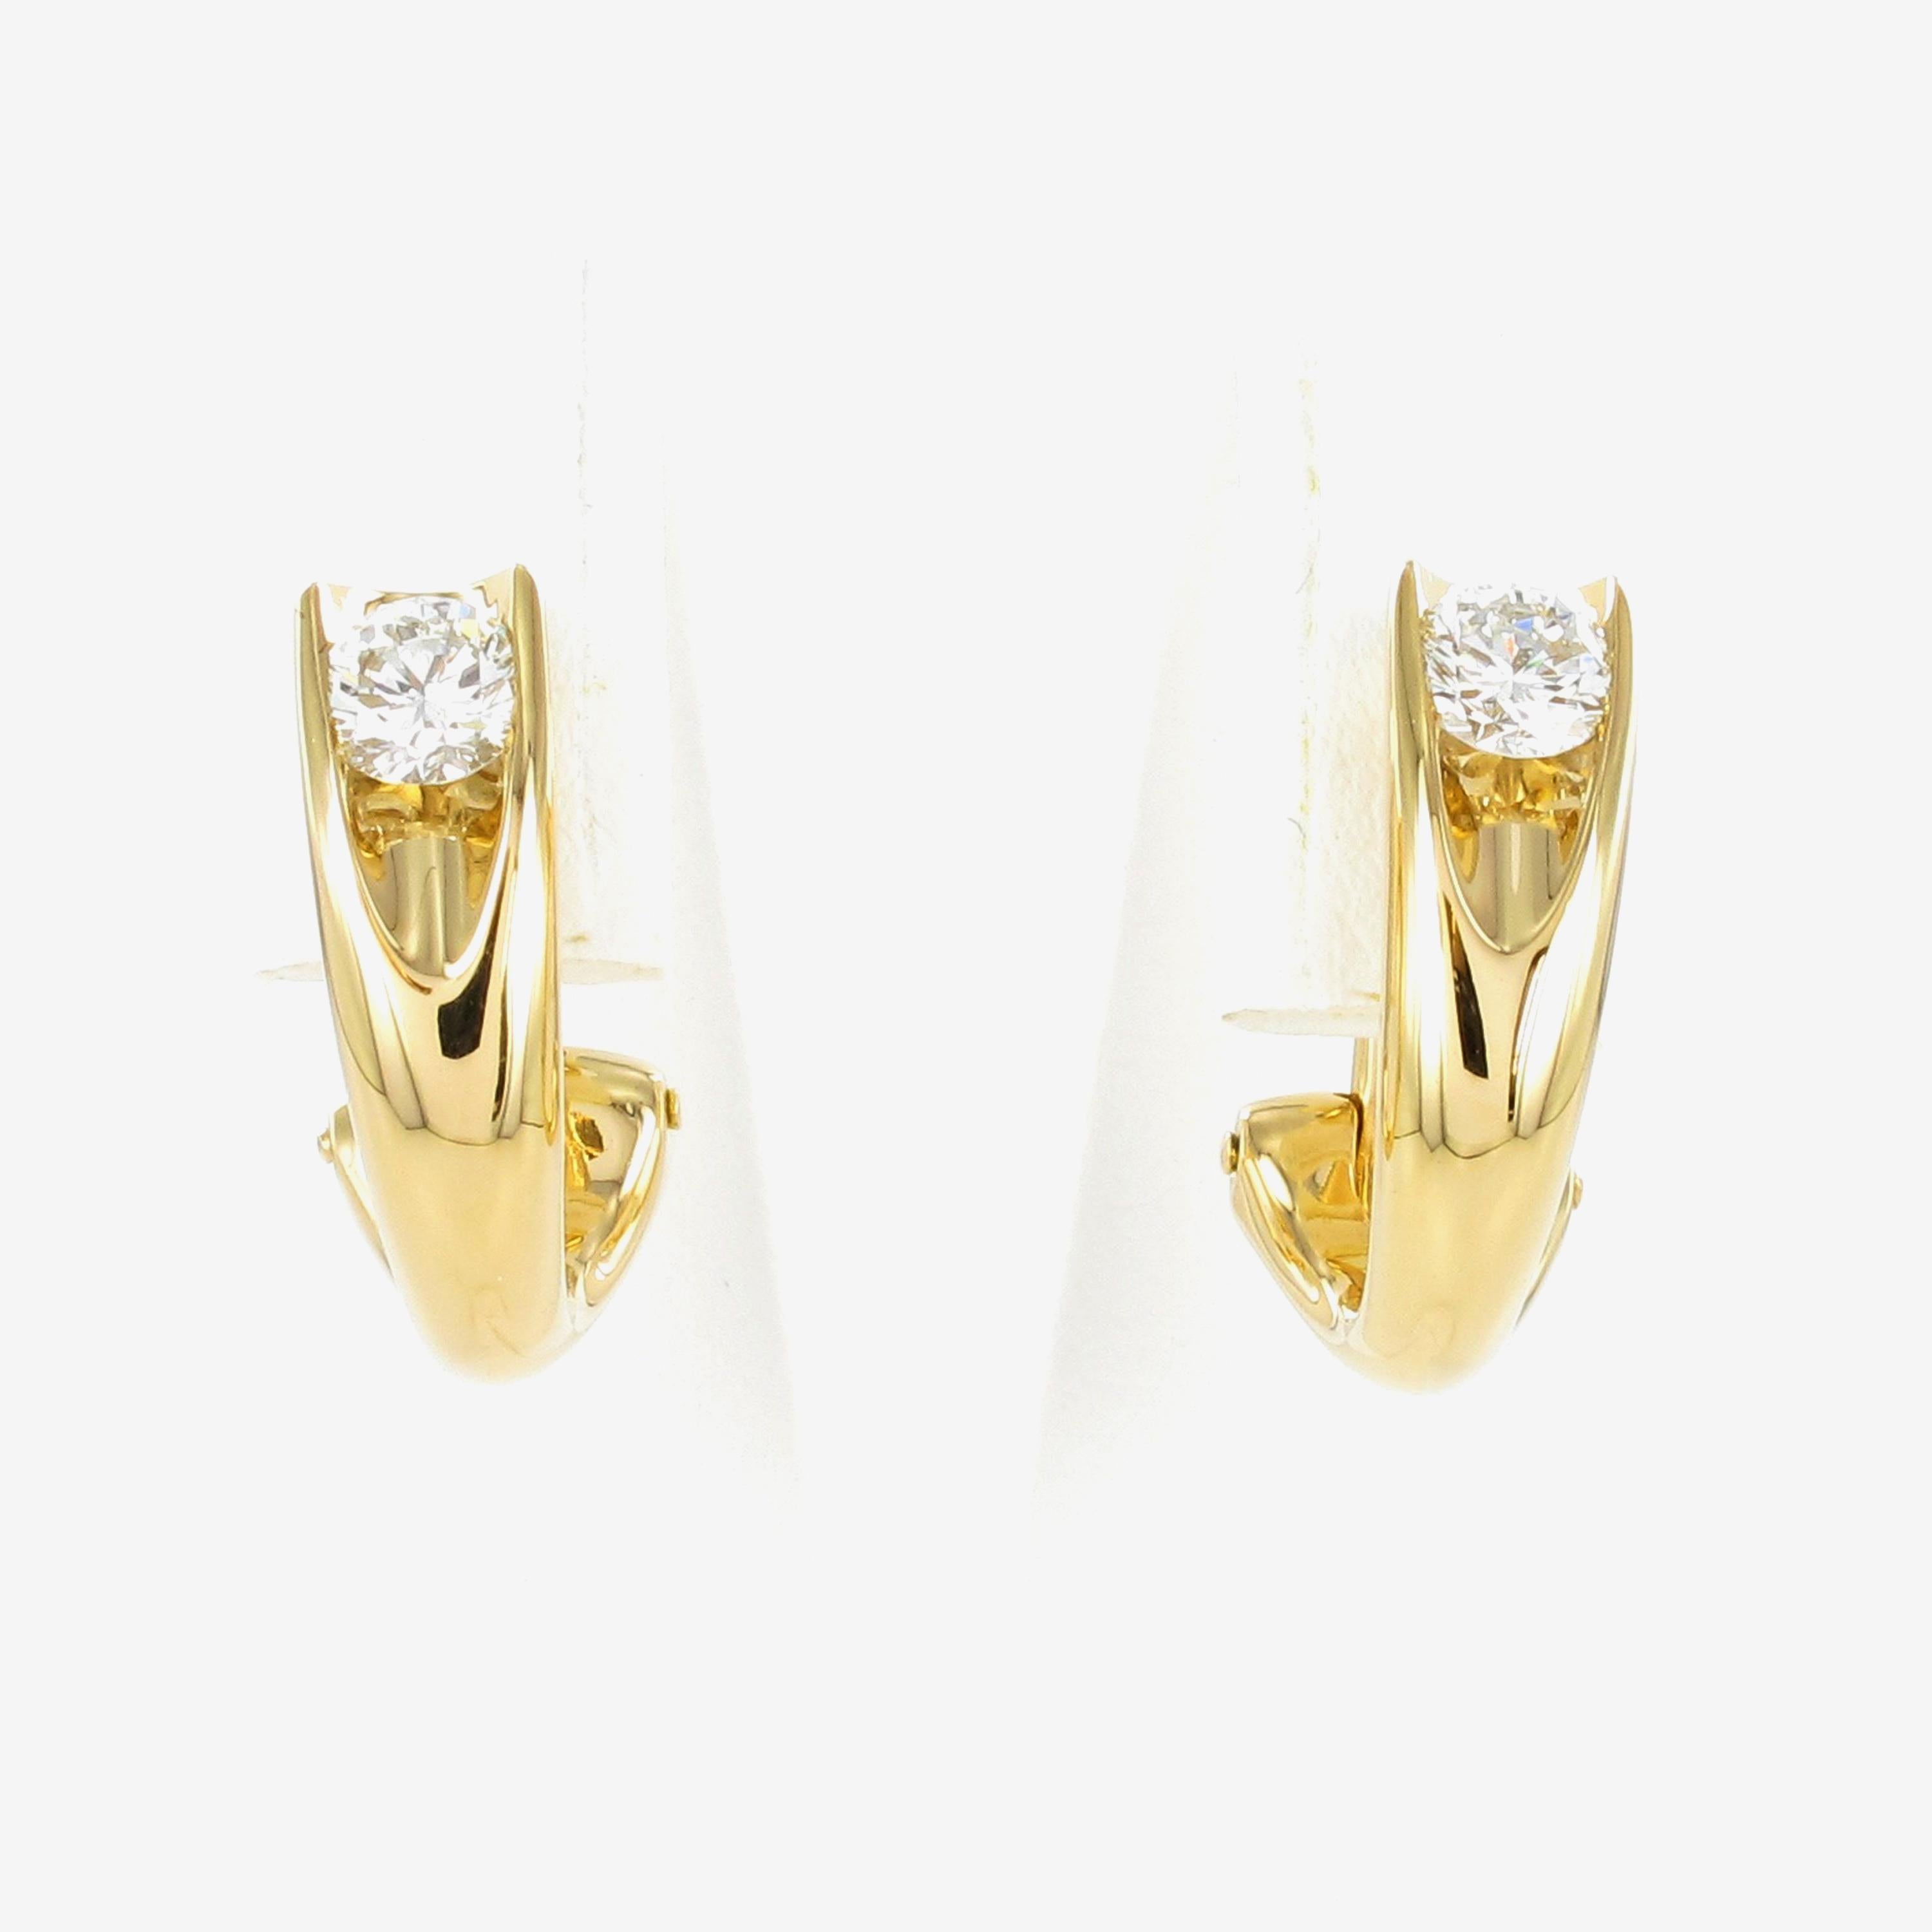 These modern designed and beautifully crafted earclips by Gübelin, Lucerne, are set with 2 brilliant-cut diamonds of G/H colour and vs clarity, totalling 0.68 carat.
Timeless and elegant in design, but with a special touch thanks to the playful